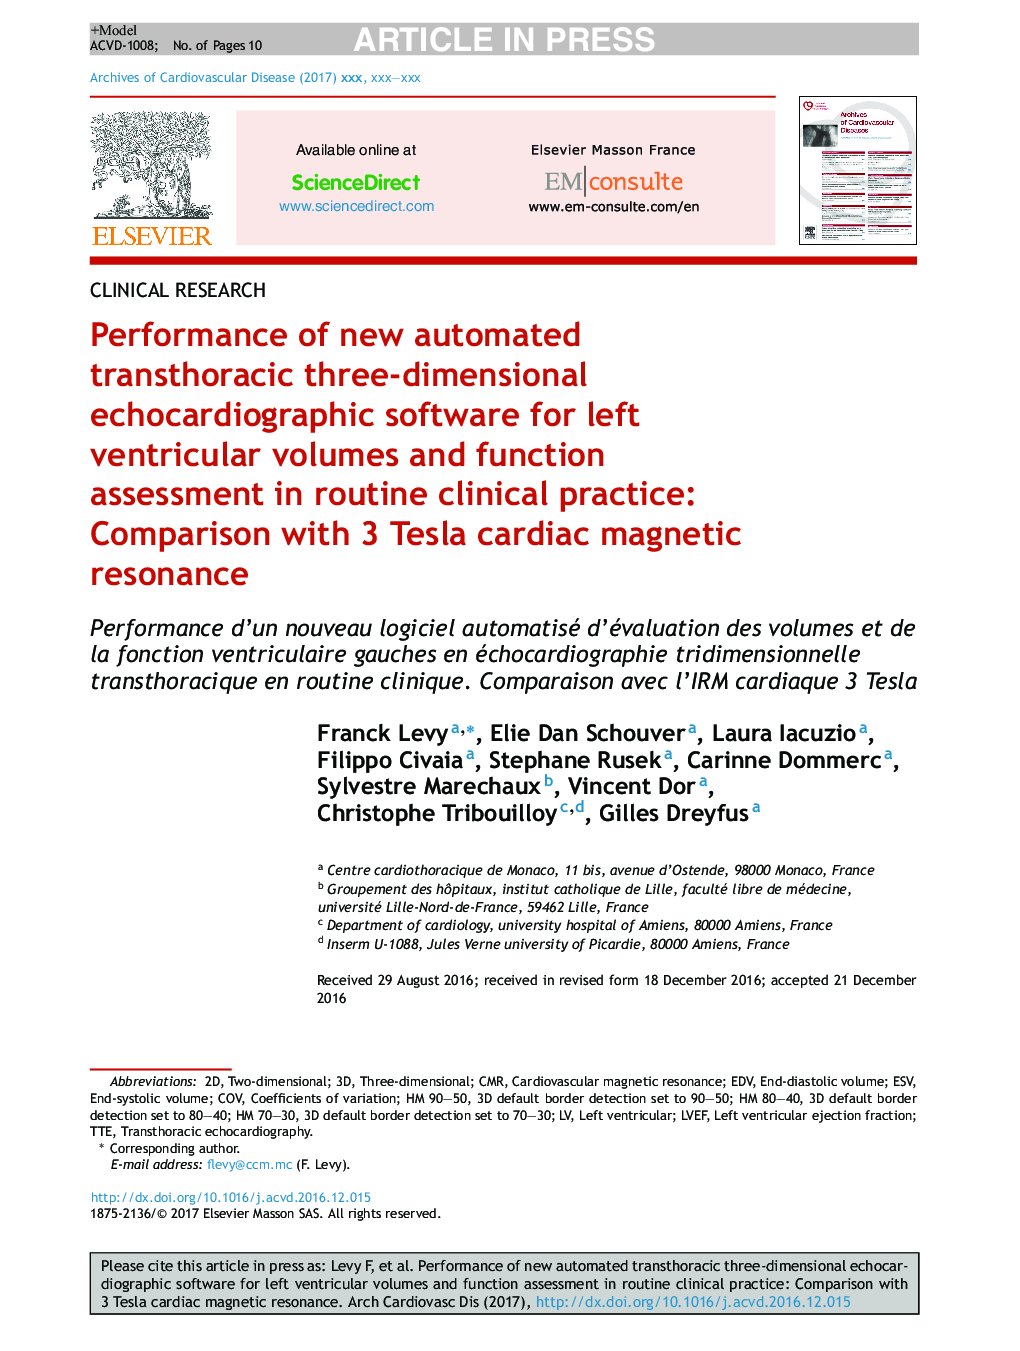 Performance of new automated transthoracic three-dimensional echocardiographic software for left ventricular volumes and function assessment in routine clinical practice: Comparison with 3Â Tesla cardiac magnetic resonance